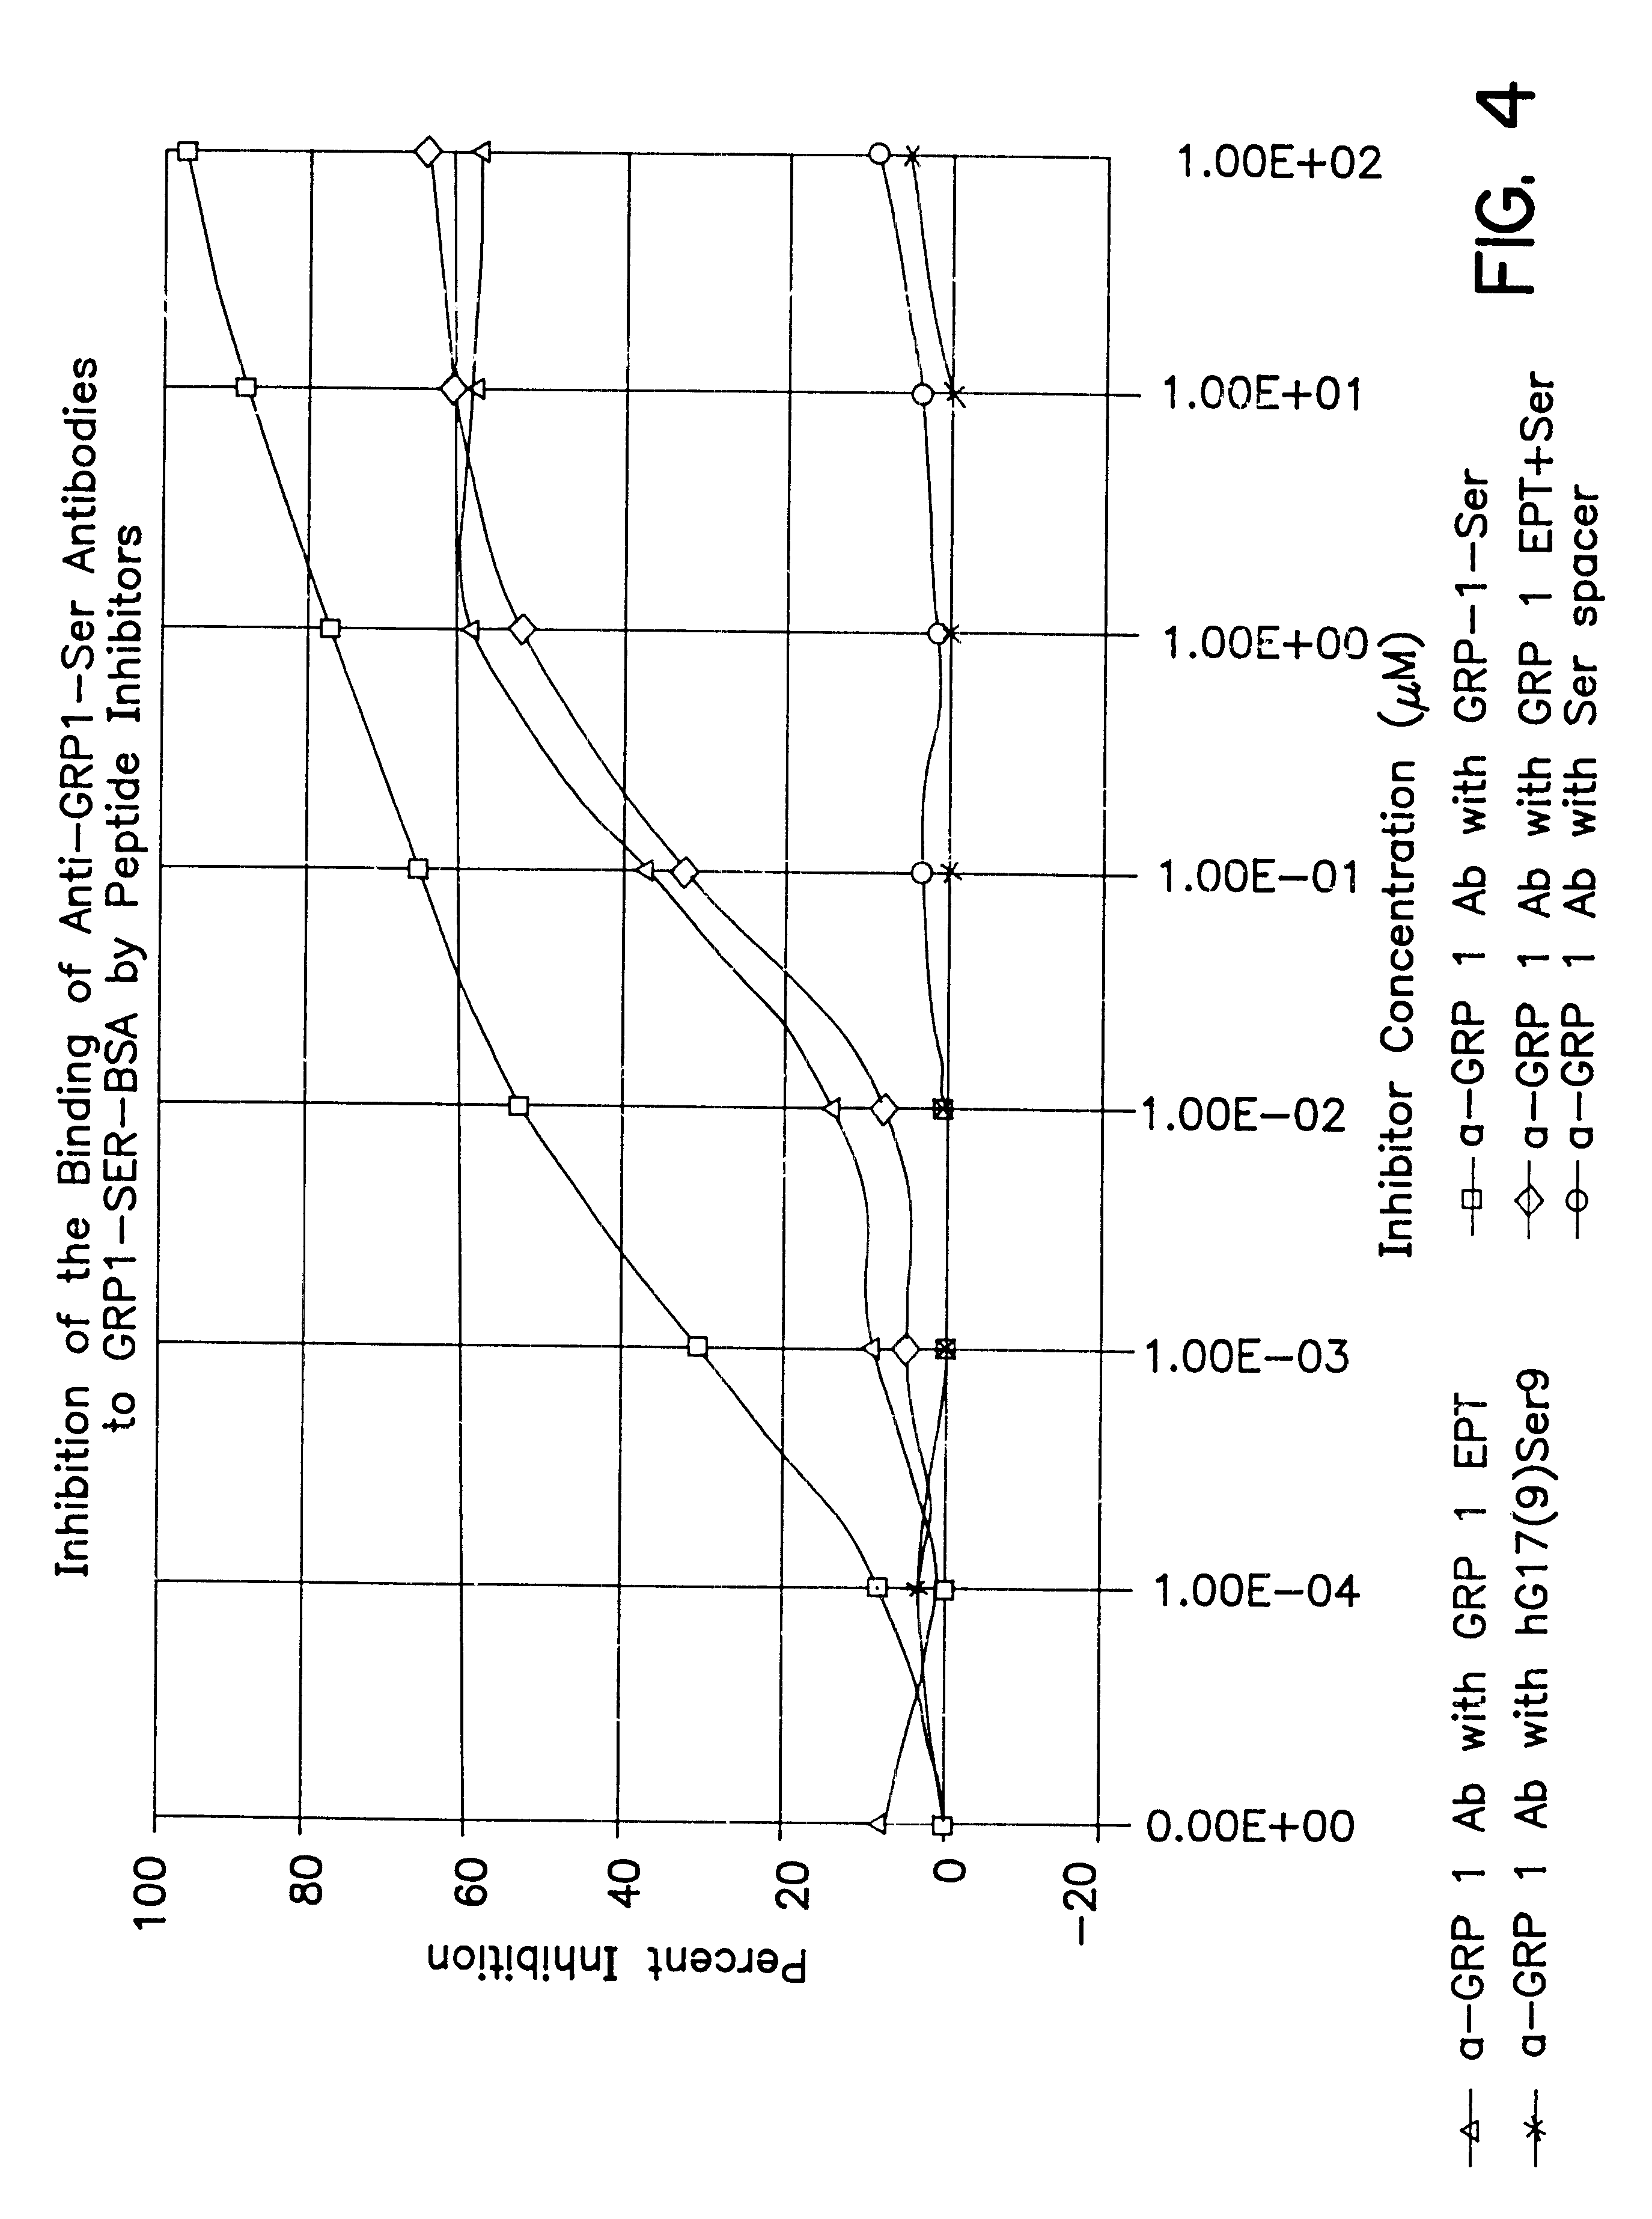 Immunogenic compositions to the CCK-B/gastrin receptor and methods for the treatment of tumors